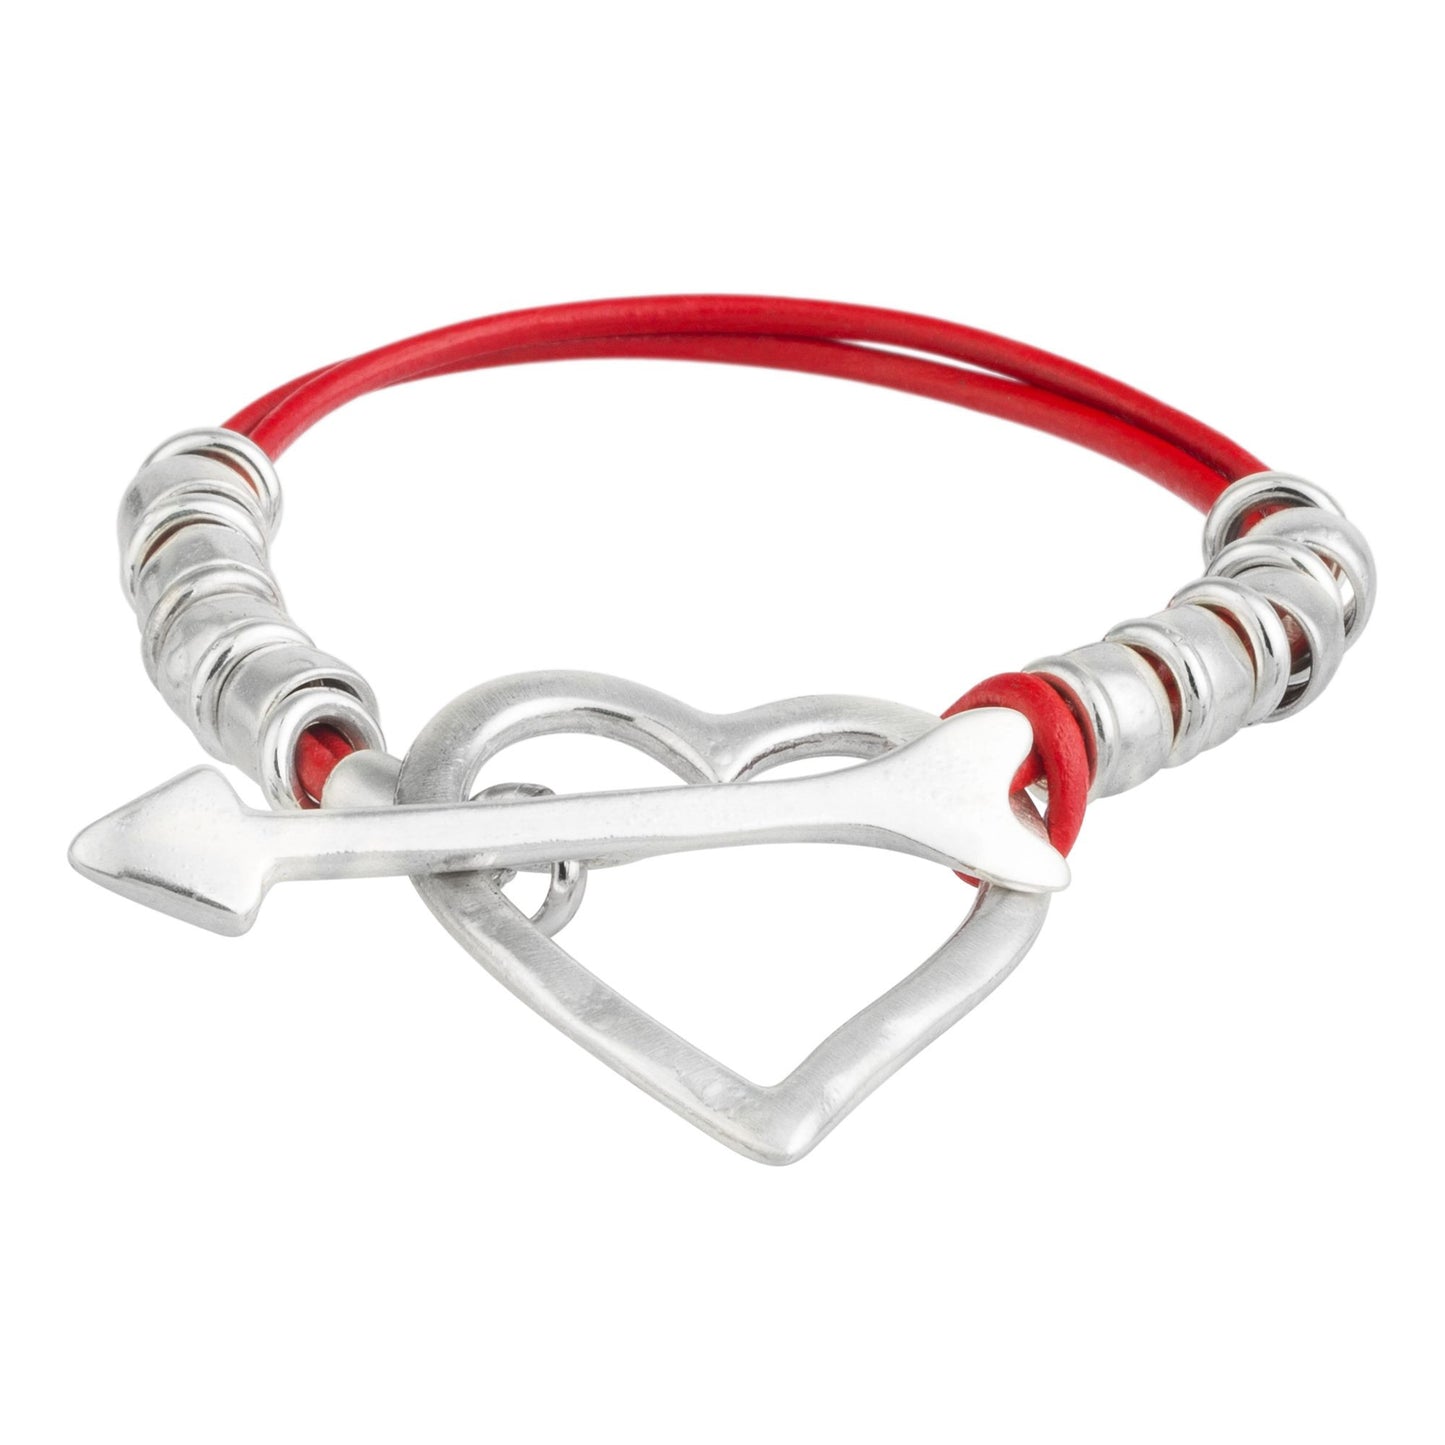 Red leather bracelet with silver plated heart clasp